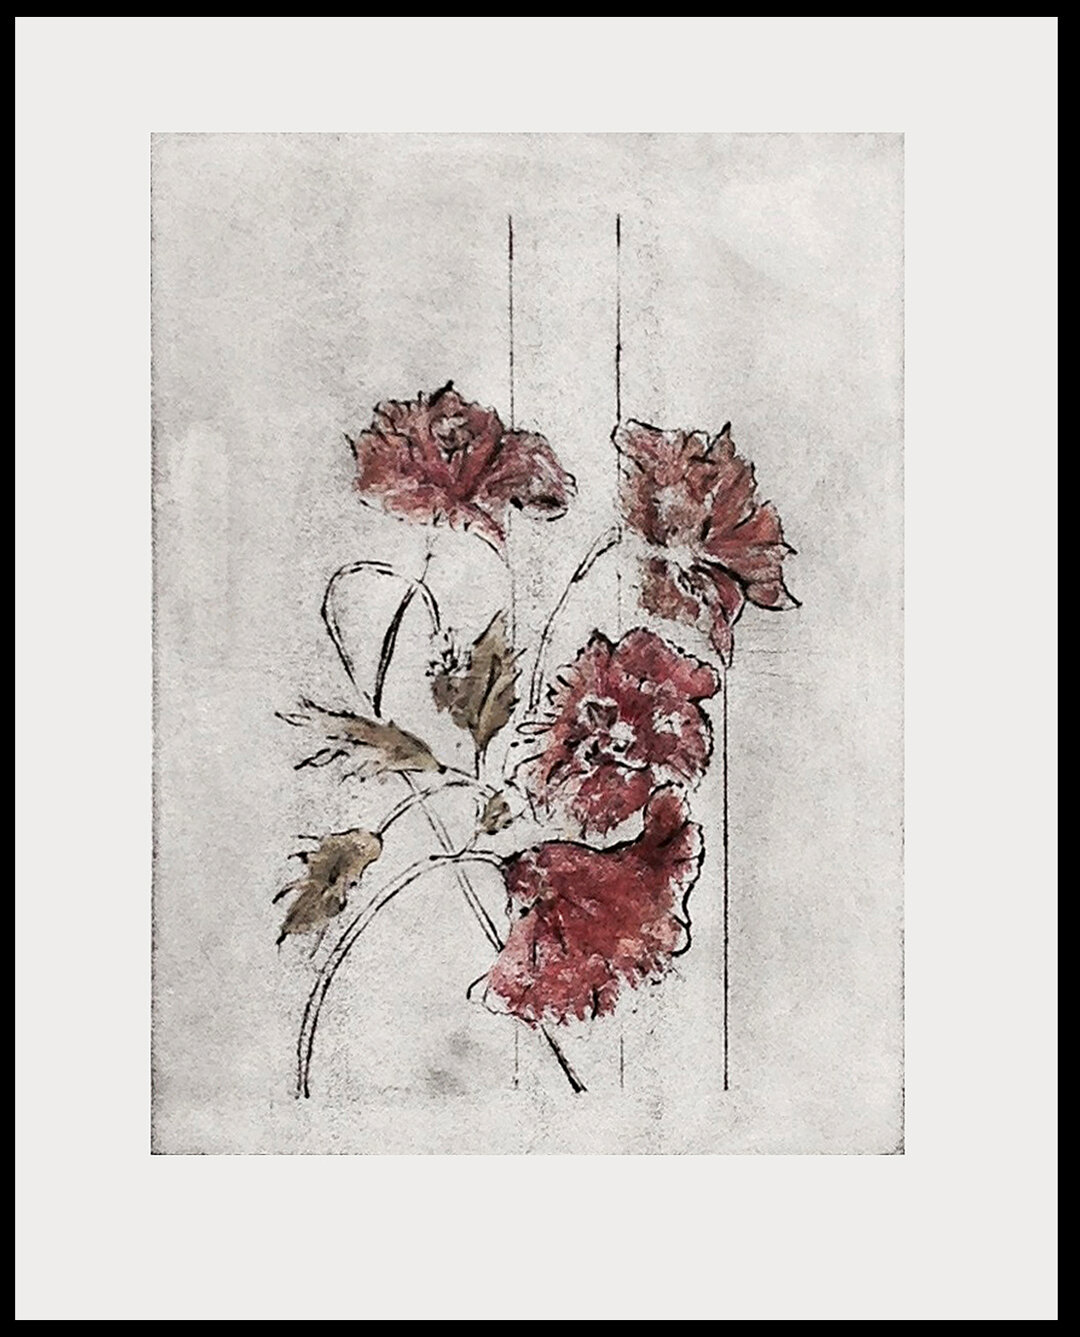    Vintage   has the look of the past, it is a mixed media monoprint which is matted and measures 11.75 x 15.75 inches.   $95     